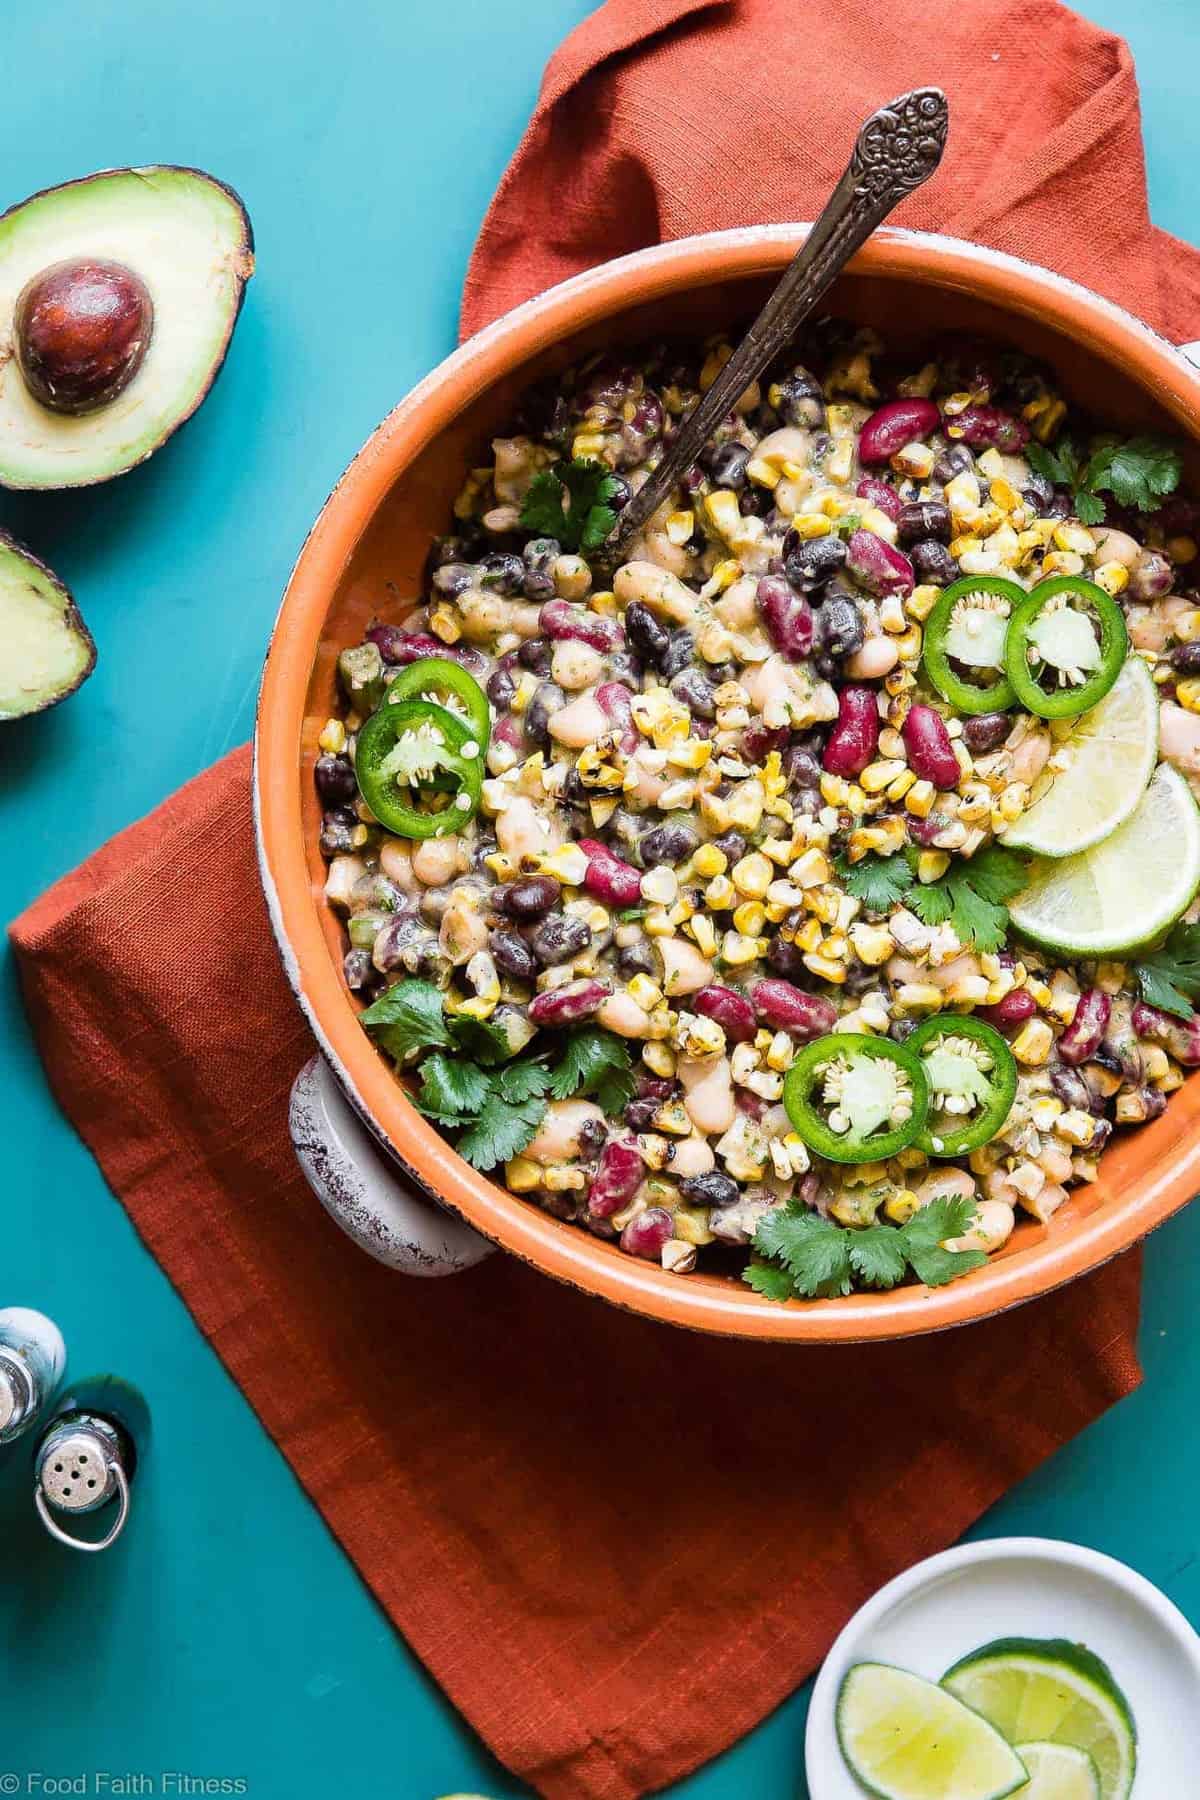 Three Bean Mexican Corn Black Bean Salad - This quick and easy, healthy three bean salad has a Mexican twist with an avocado salsa dressing! It's the perfect Summer side and it's gluten free, vegan and only one Weight Watchers Freestyle point! | #Foodfaithfitness | #Glutenfree #Vegan #Weightwatchers #Healthy #July4th